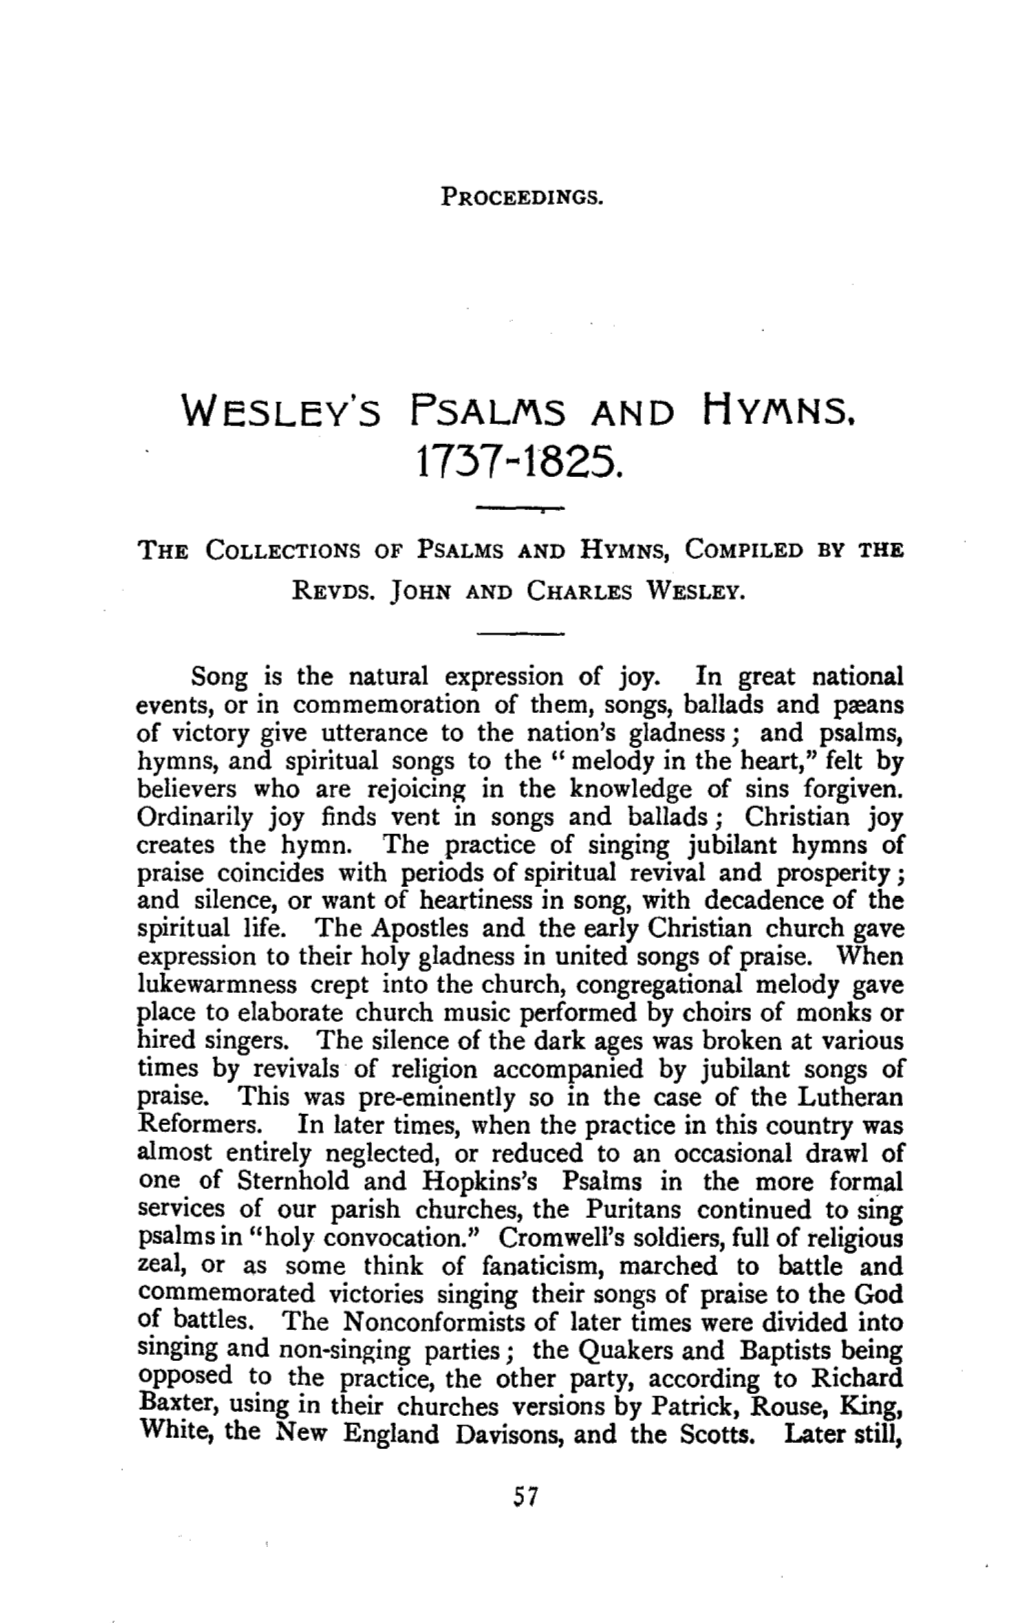 WESLEY's FSALJY\S and HYJY\NS. 57